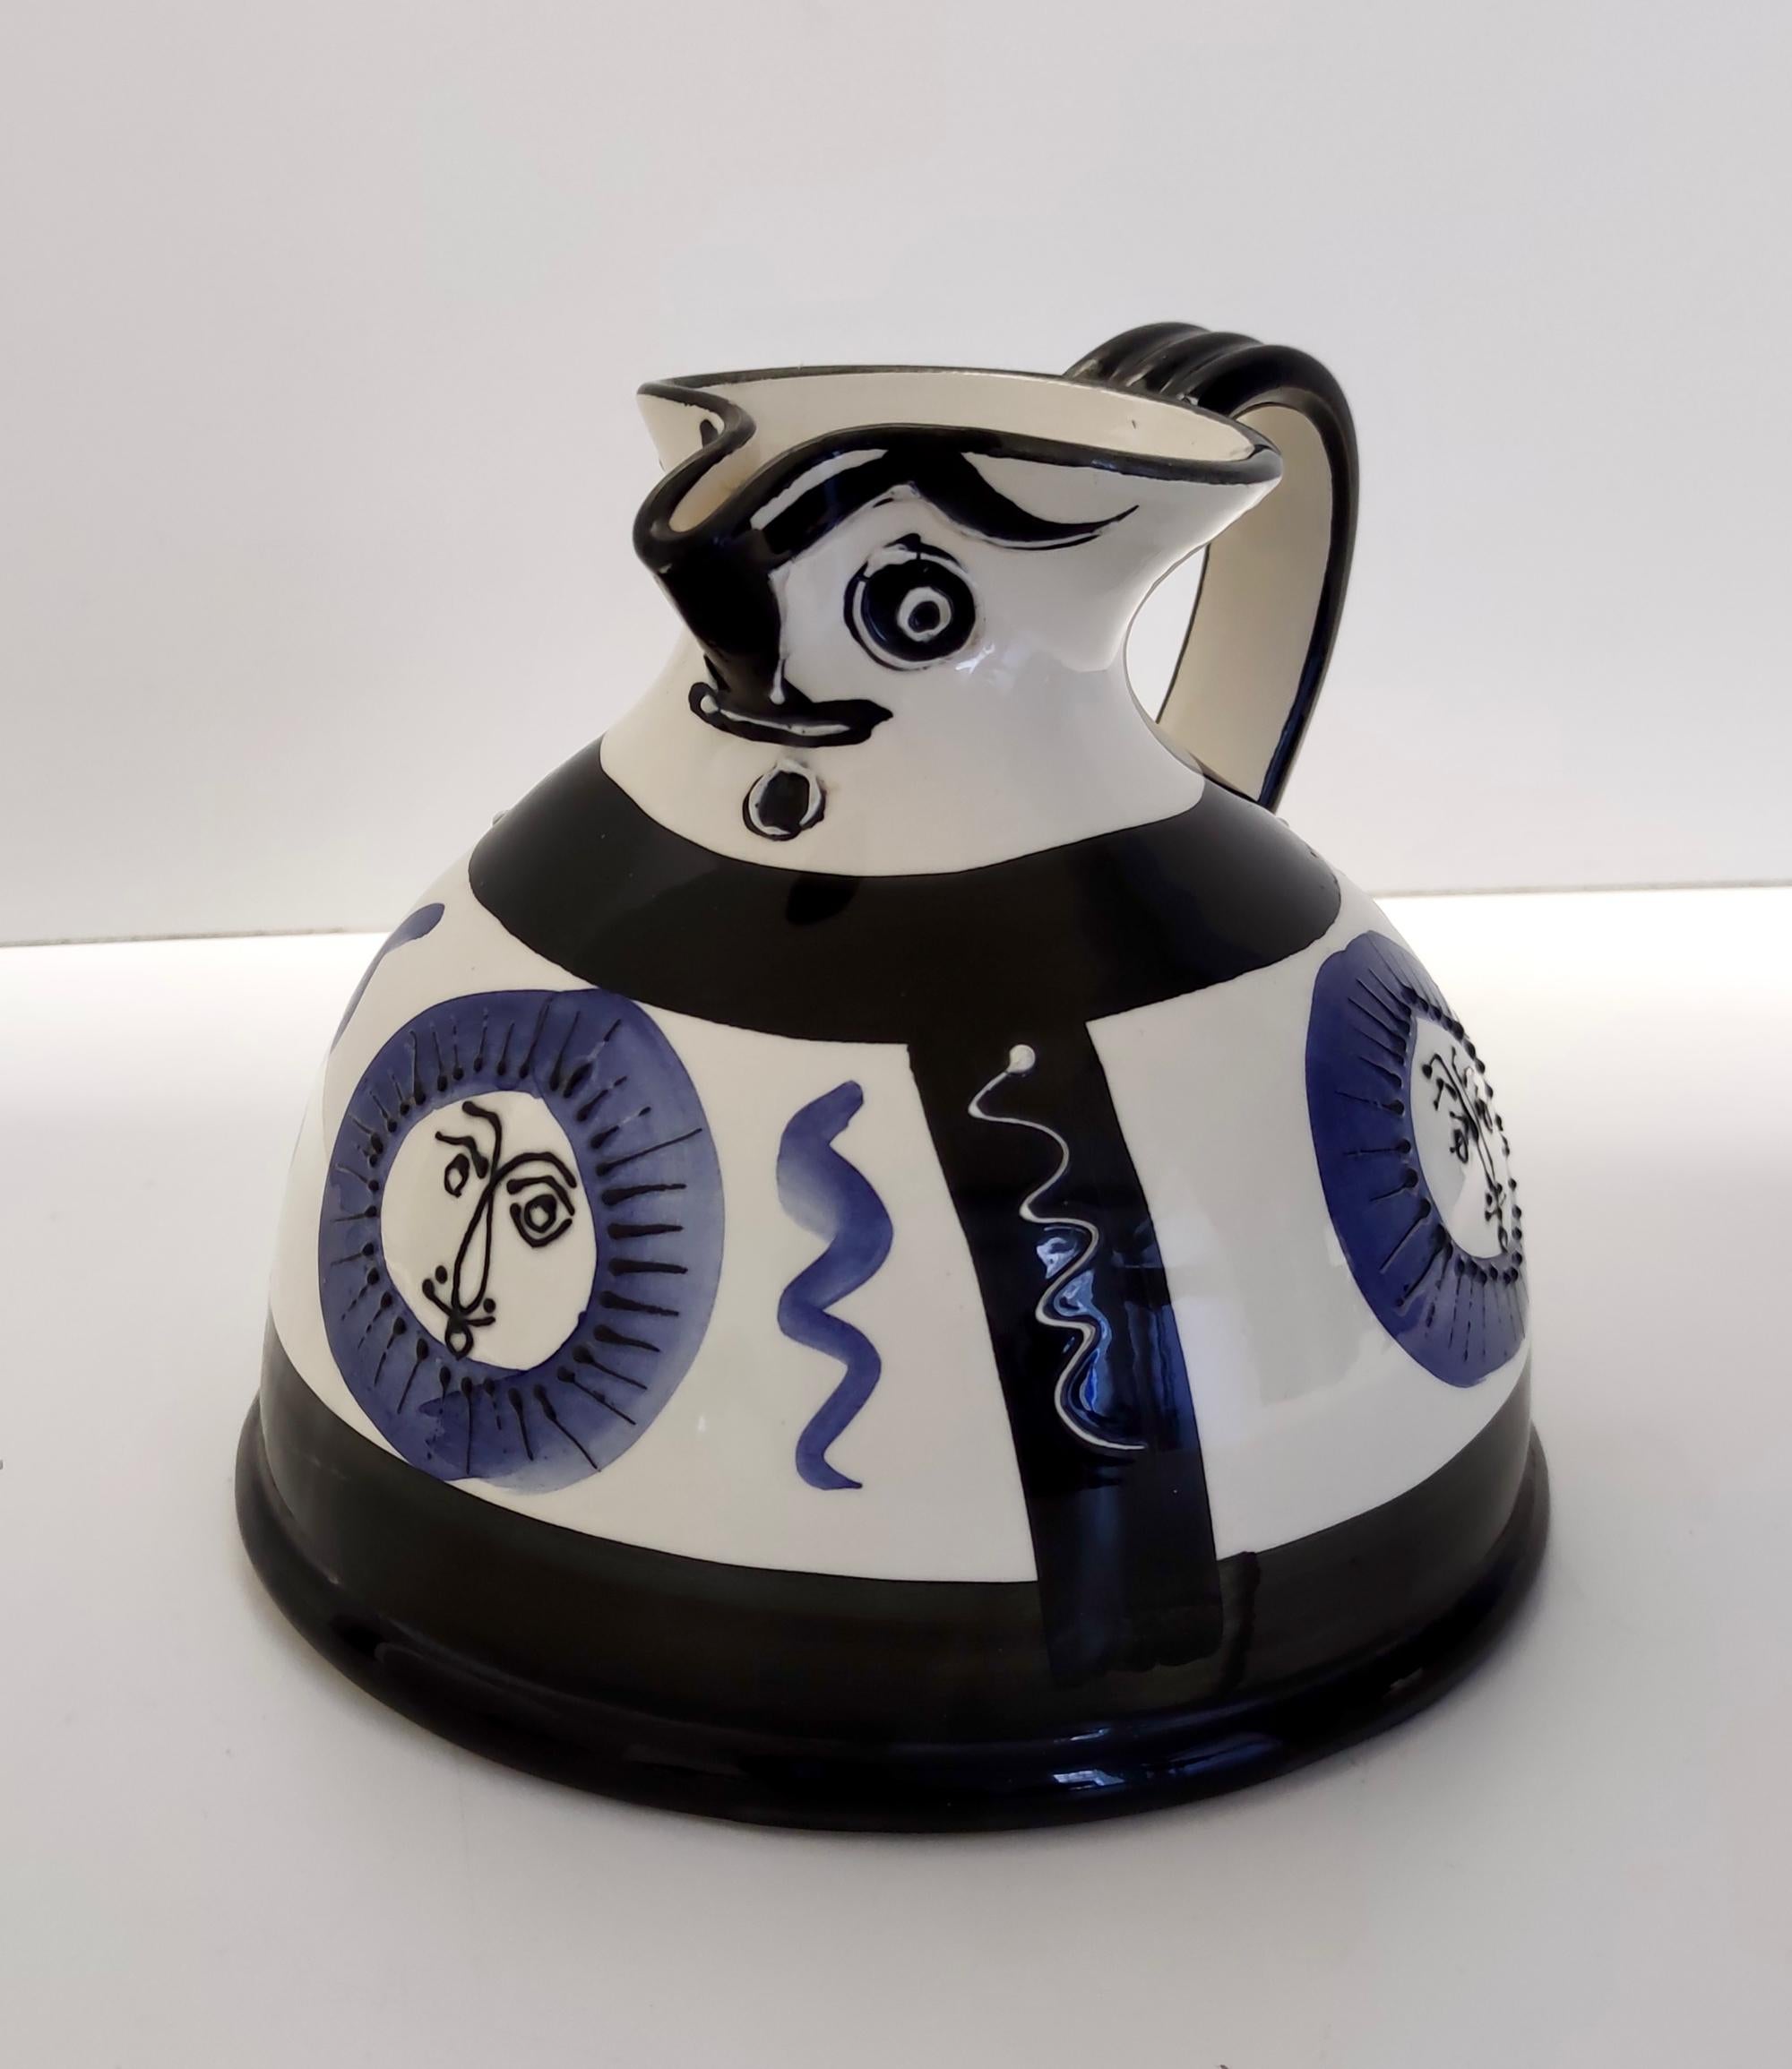 Late 20th Century White, Black and Blue Hand-Painted Ceramic Jug / Vase in the Style of Picasso For Sale